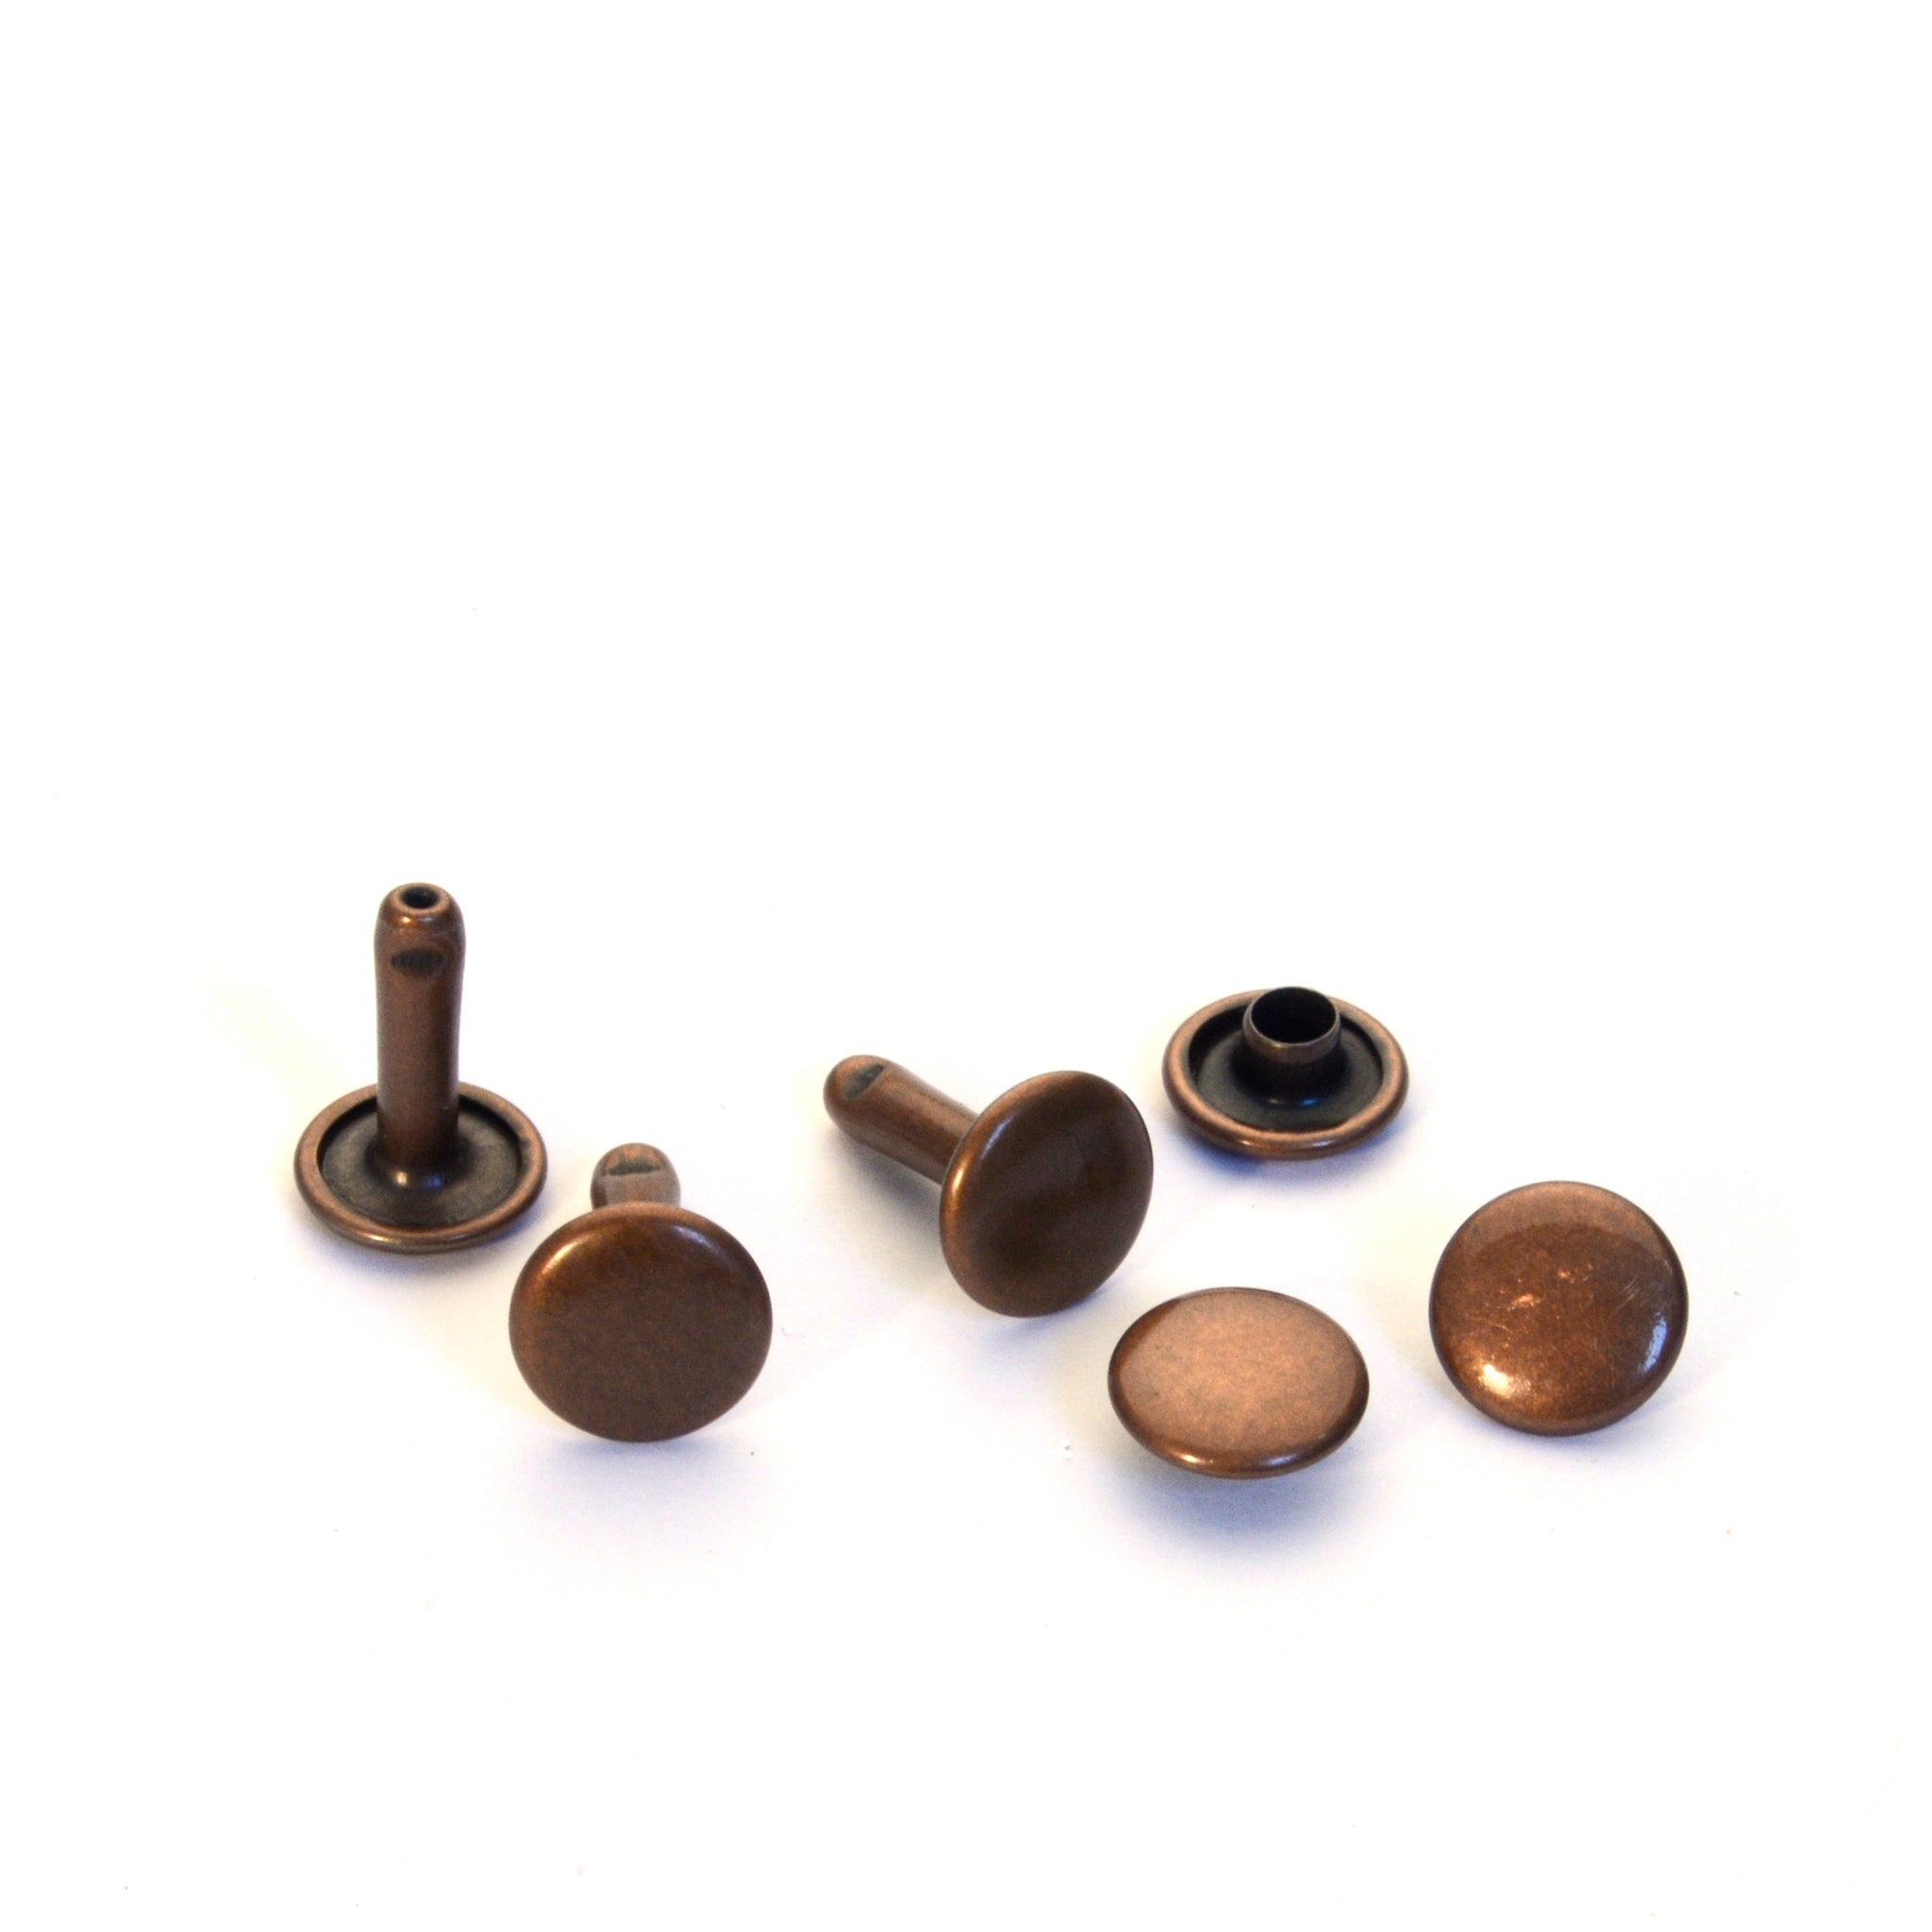 Large Antique Copper Double Cap Rivets from Identity Leathercraft